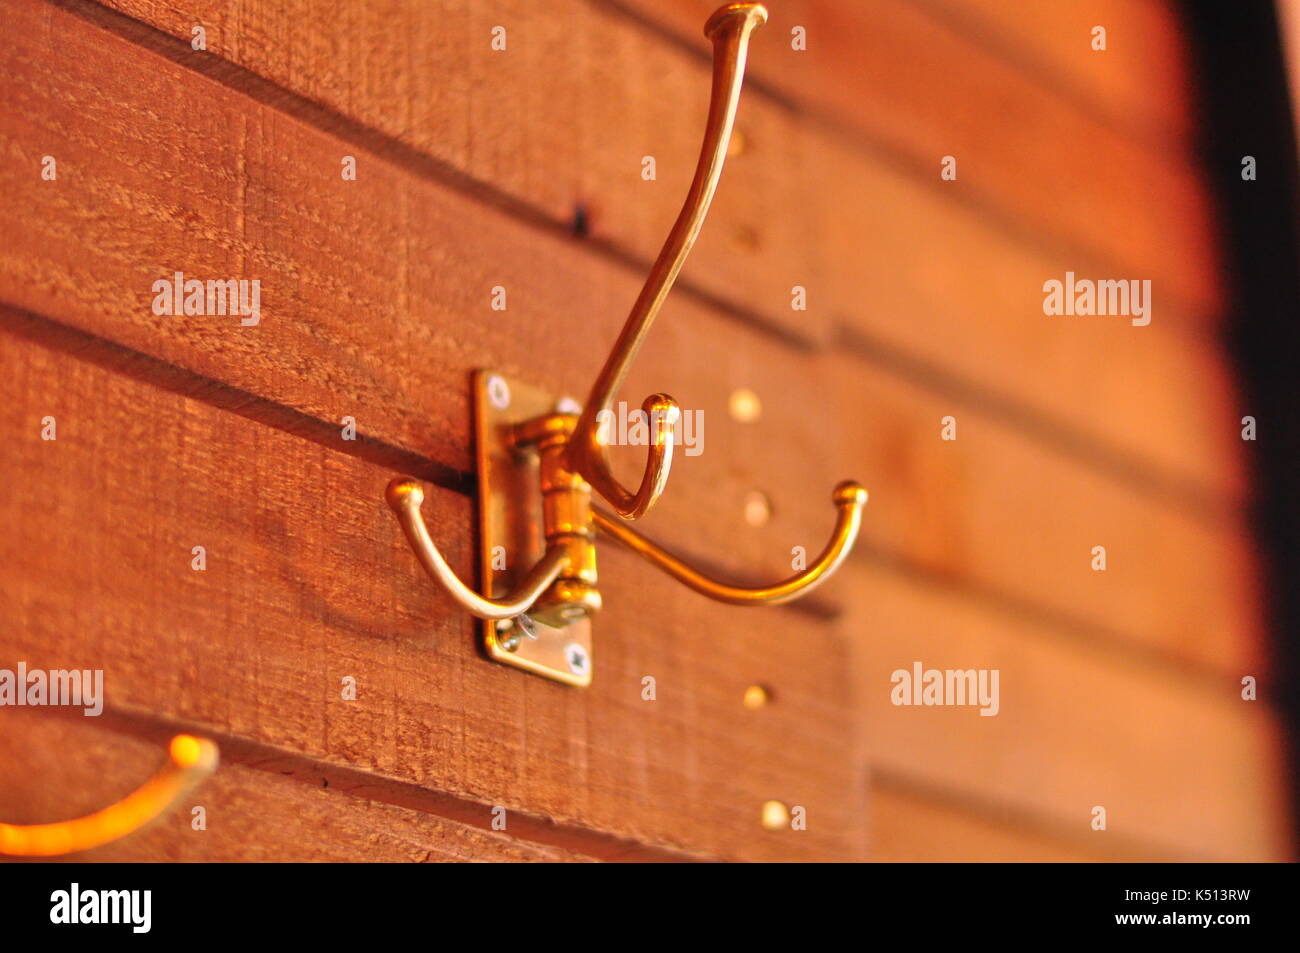 Hook on wooden wall to hang coats Stock Photo